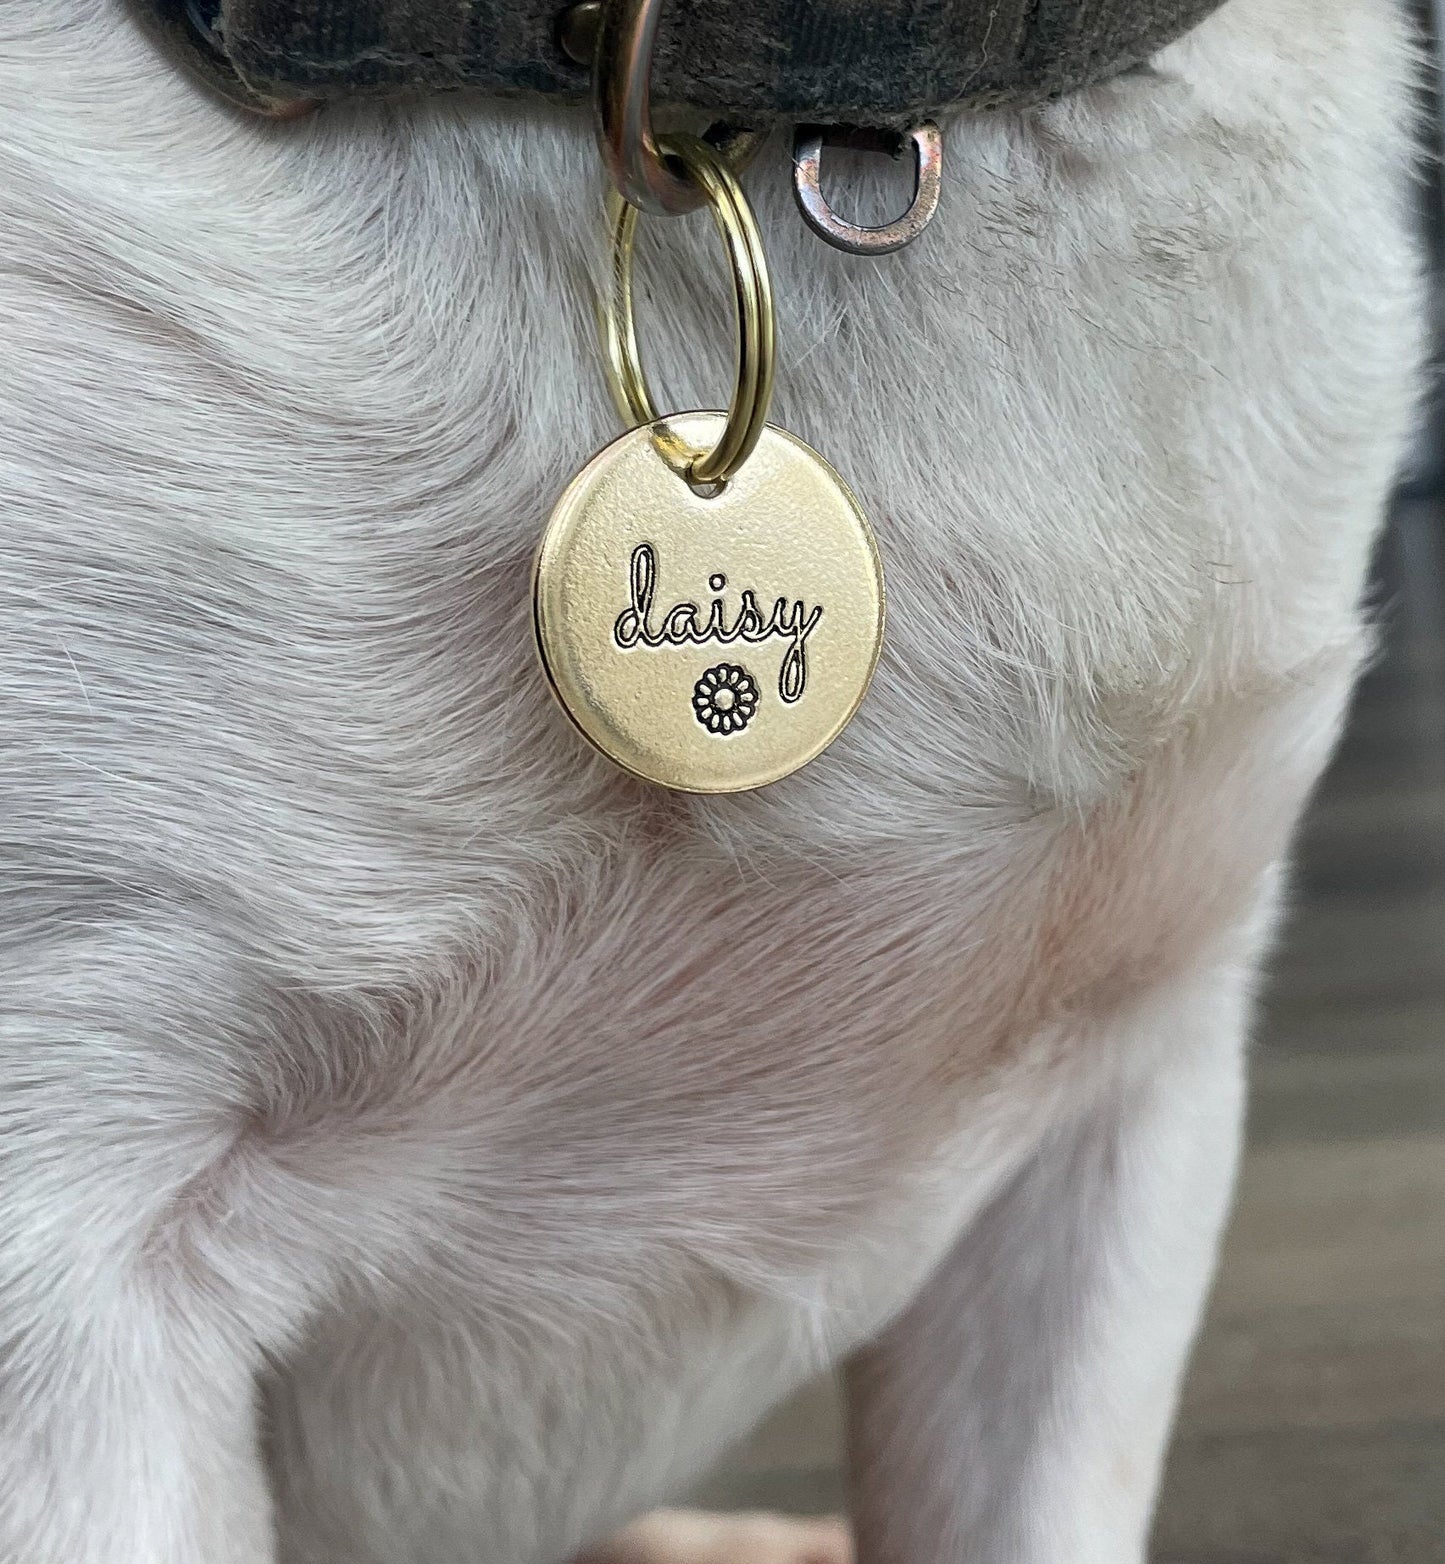 Personalized Dog Tag - Daisy Flower Design Engraved - Cat ID Tag - Dog Collar Tag - Custom Dog Tag - Personalized Tag - Pet ID Tag - Daisy Dog Tag - Dog Gear - Dog Accessories - Pet Accessories - Daisy Flower - Flowers - Nature Themed